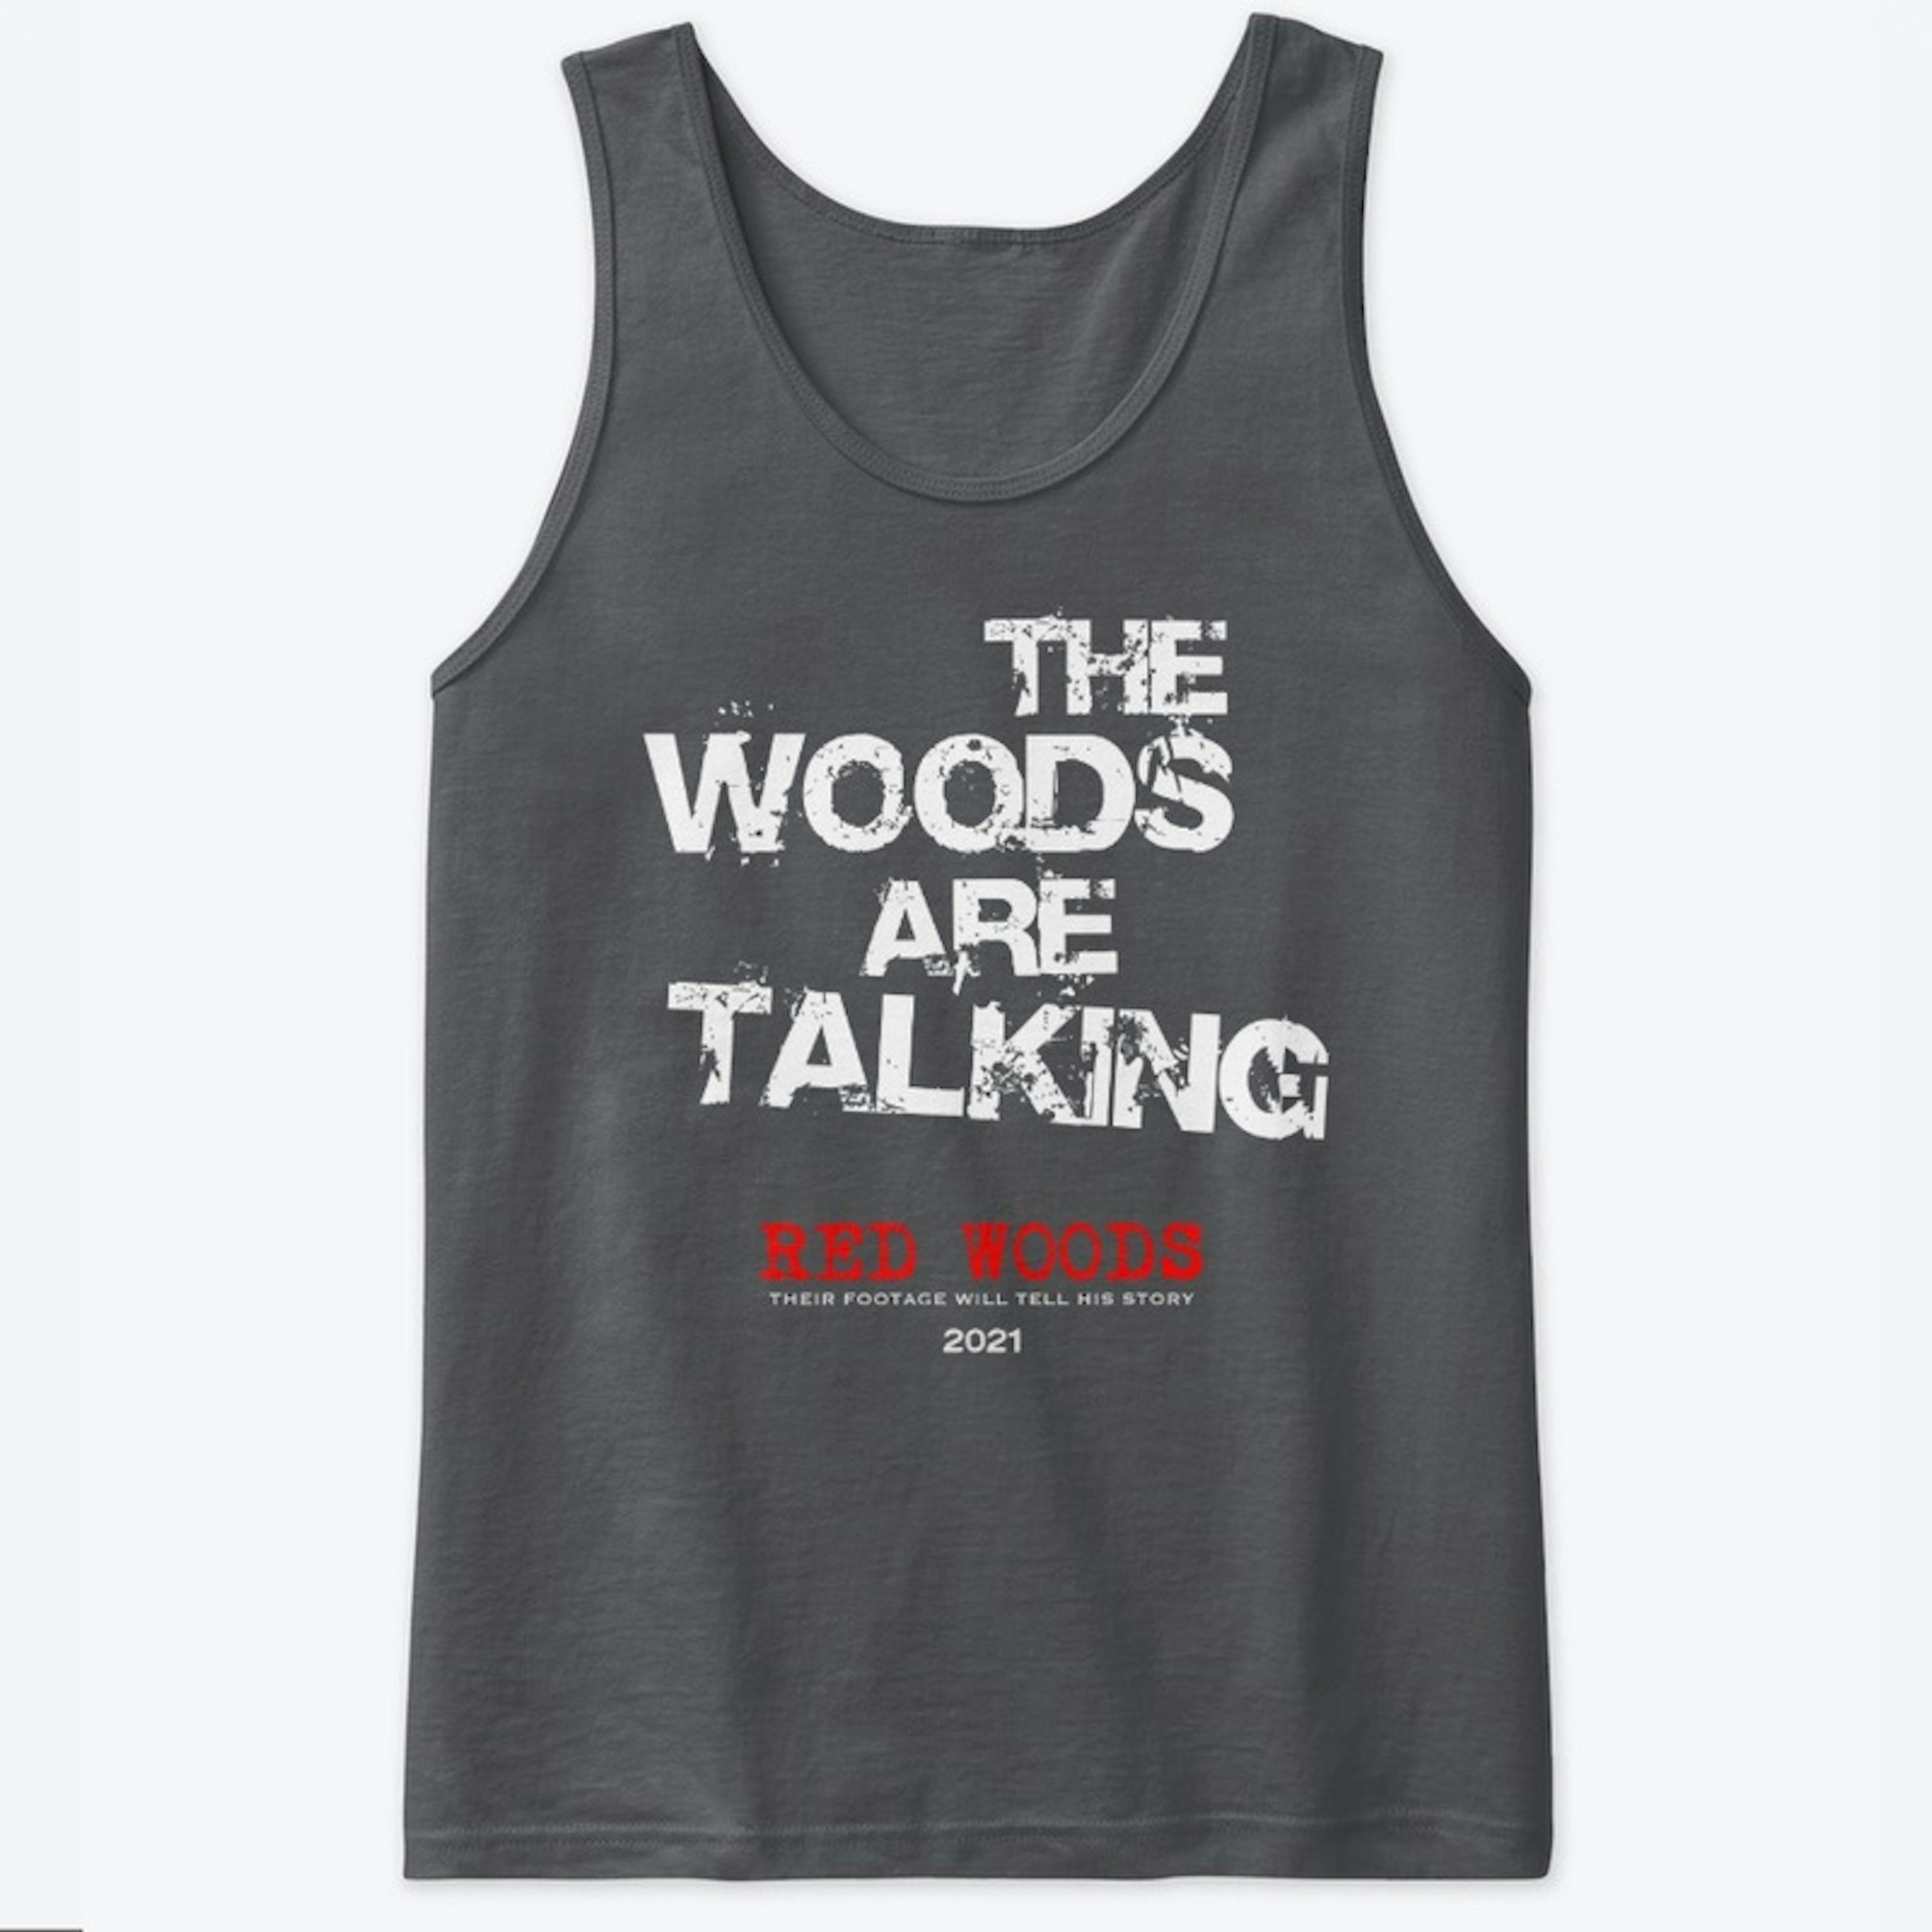 The Woods Are Talking - RED WOODS